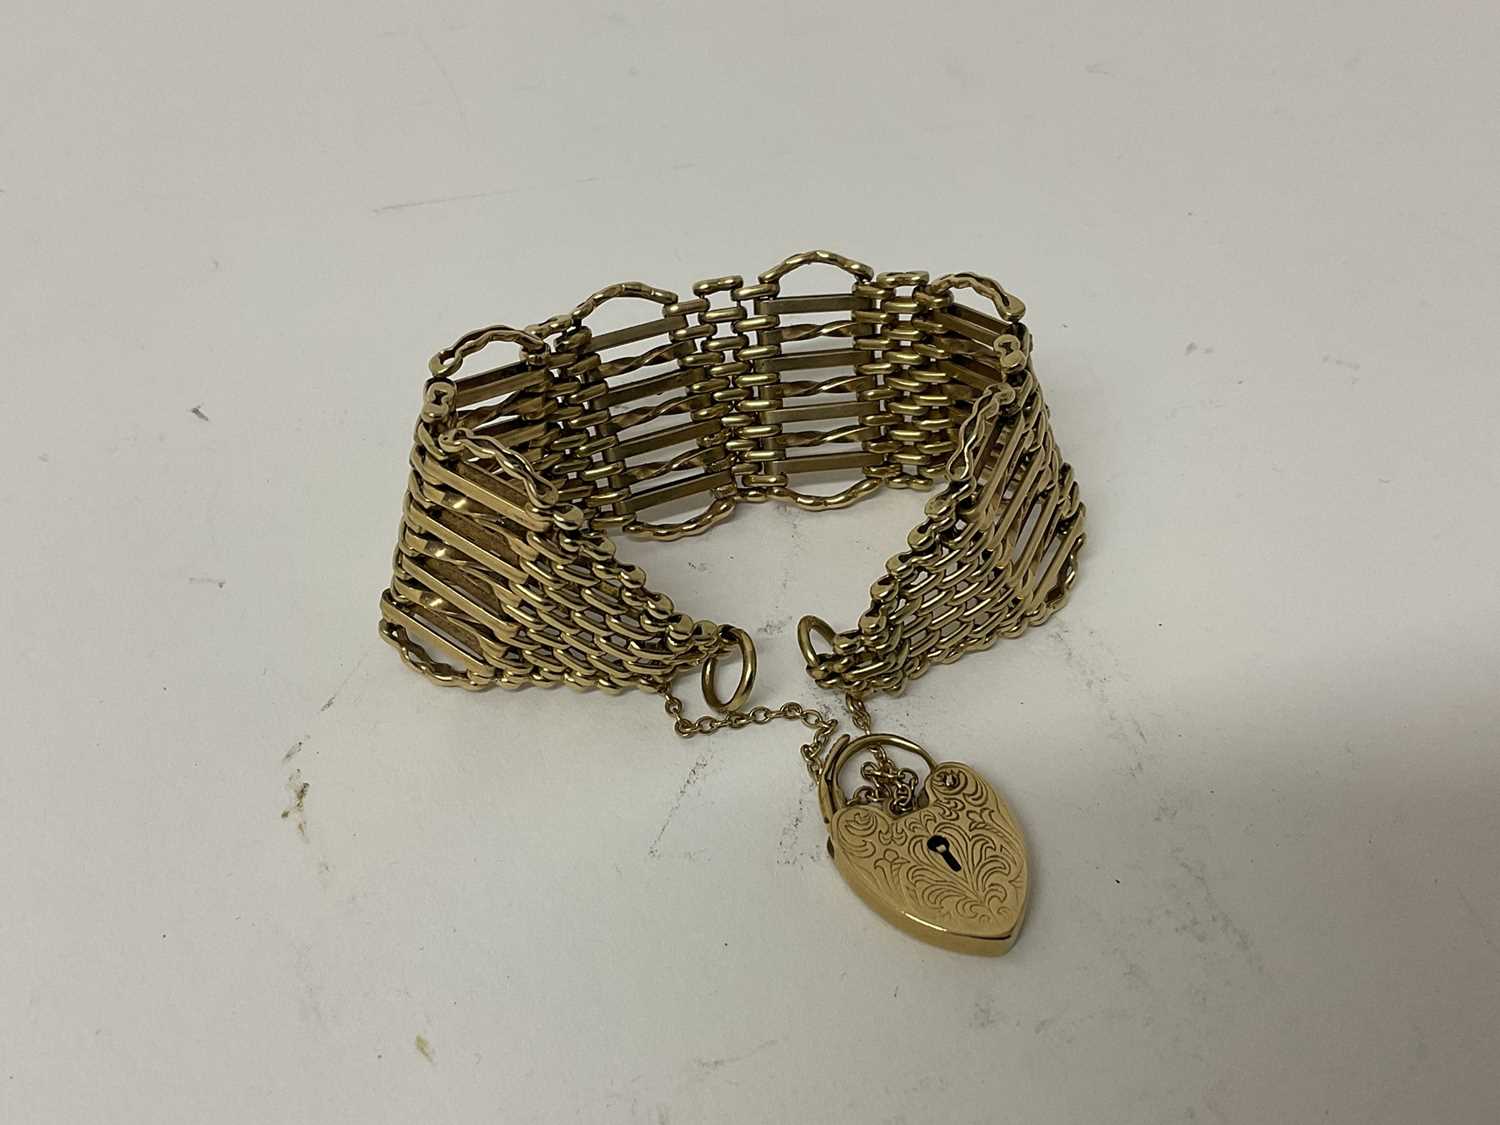 Lot 96 - 9ct yellow gold gate bracelet with heart shaped padlock clasp